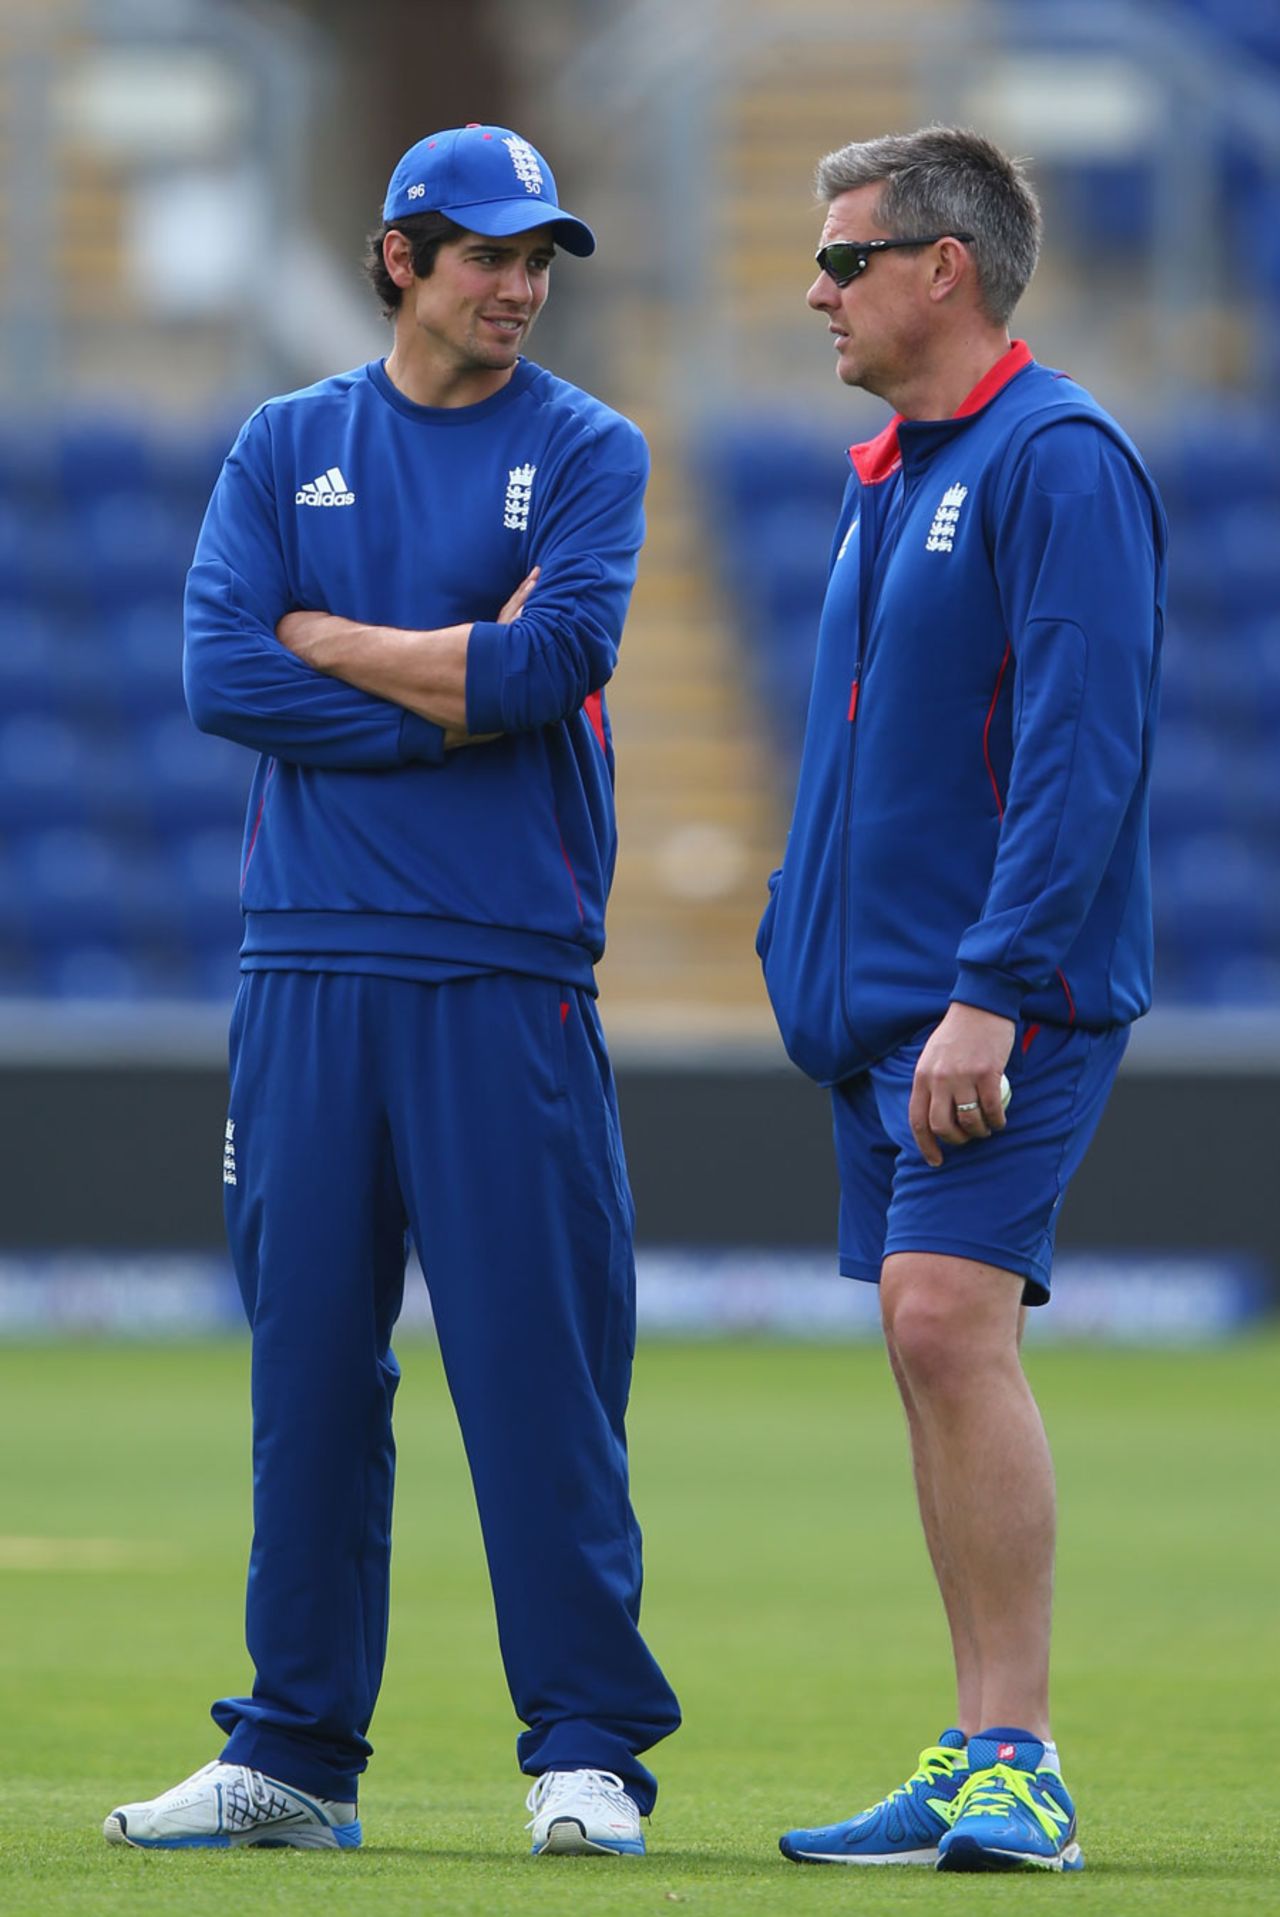 Alastair Cook and Ashley Giles chat during England training, Champions Trophy, Cardiff, June 15, 2013